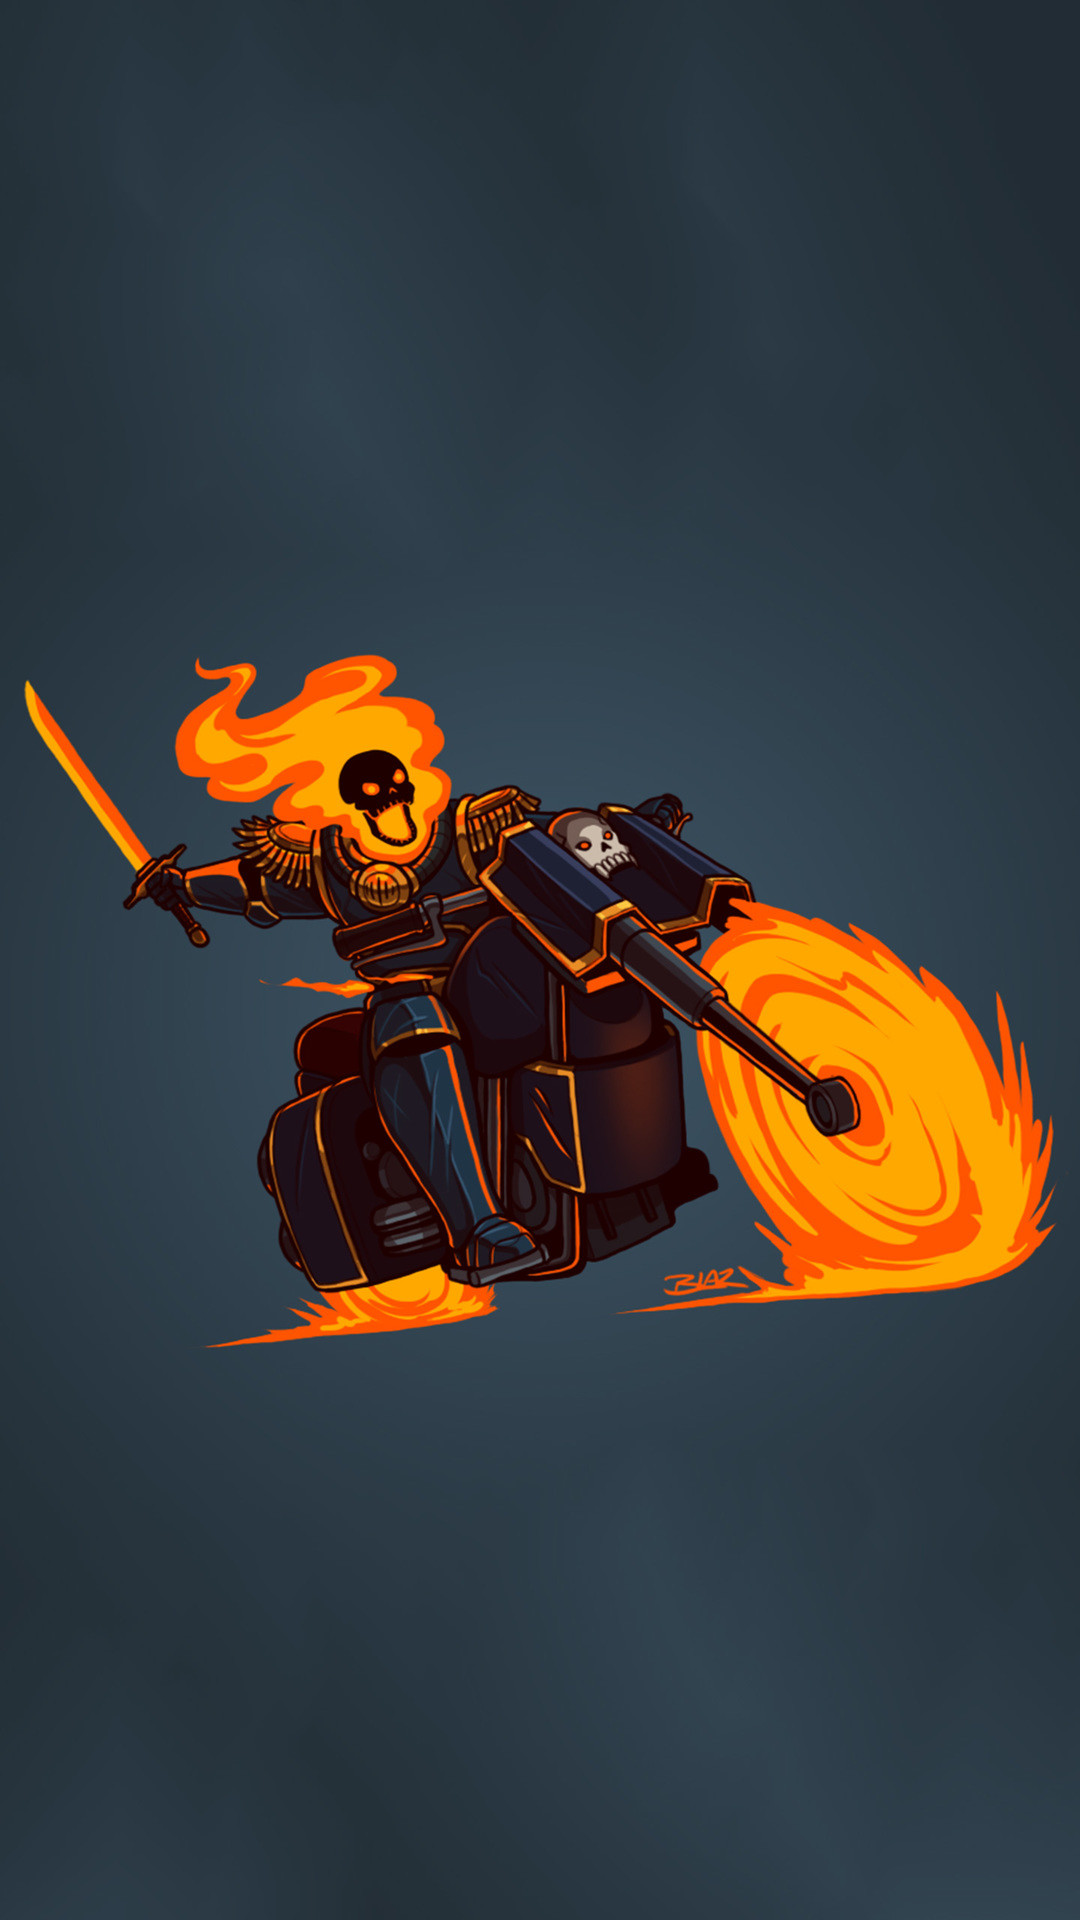 1080x1920 Ghost rider wallpaper hd collections